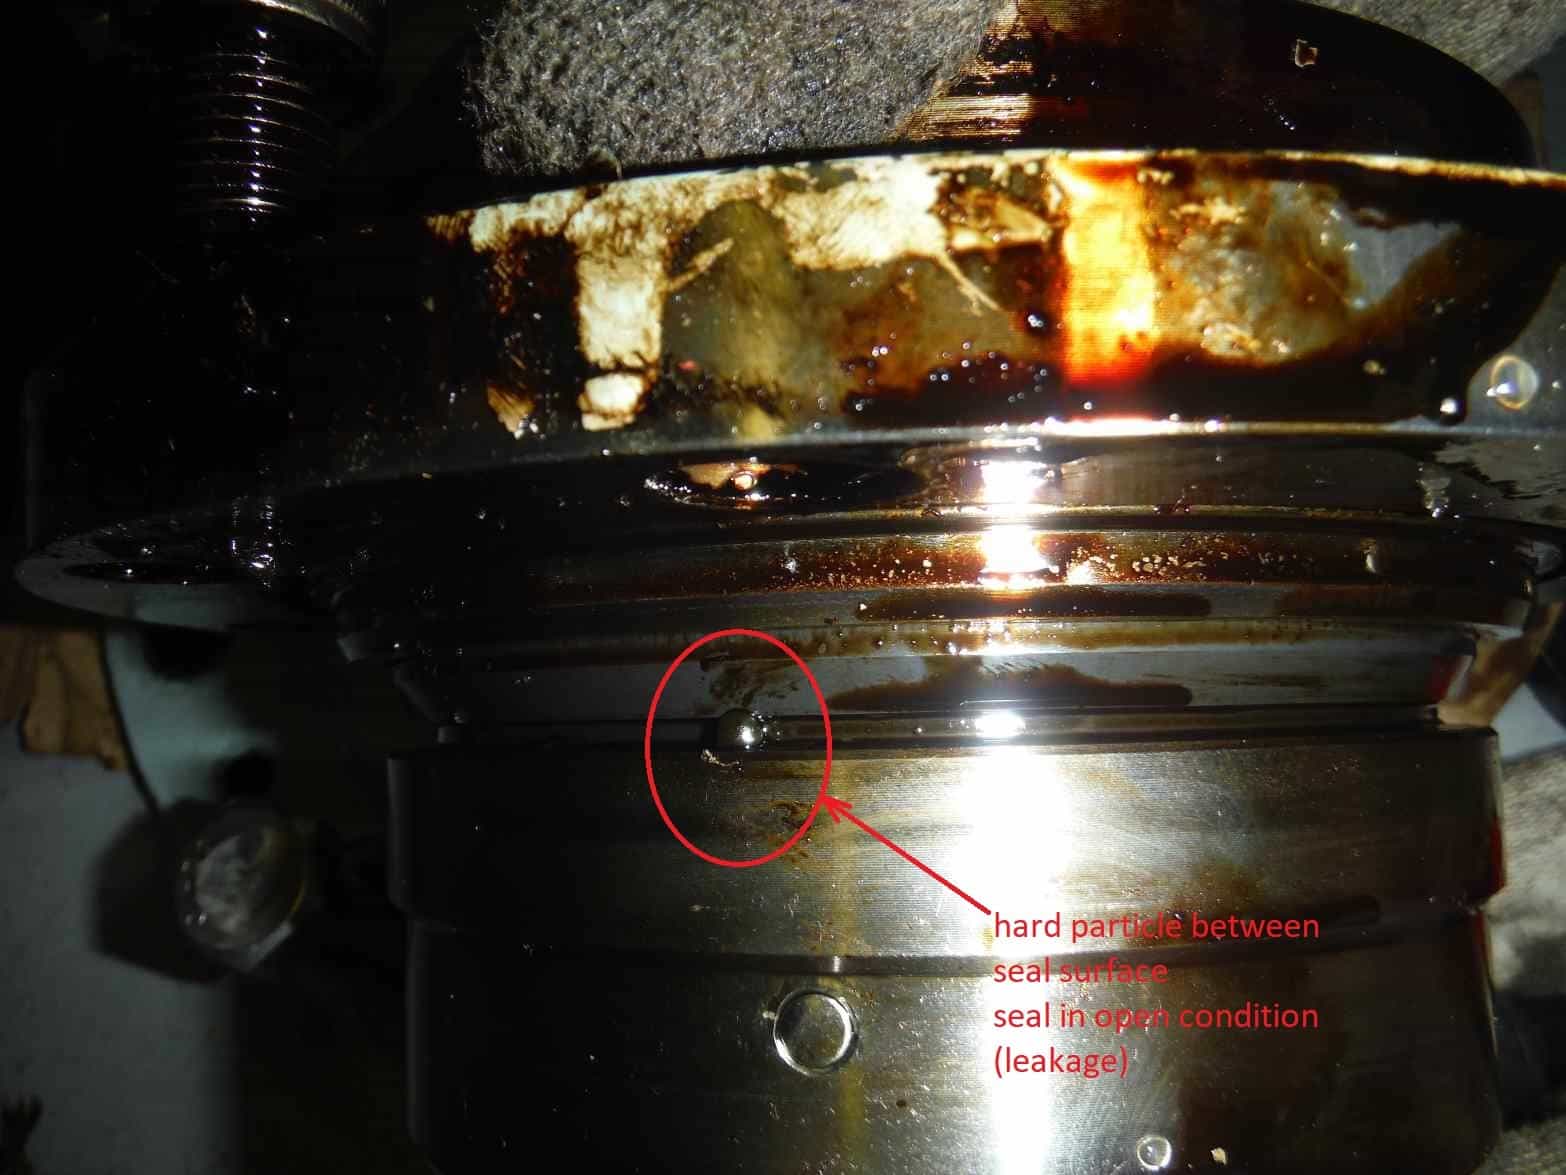 A mechanical seal support failure picture showing a leak caused by a hard particle.)